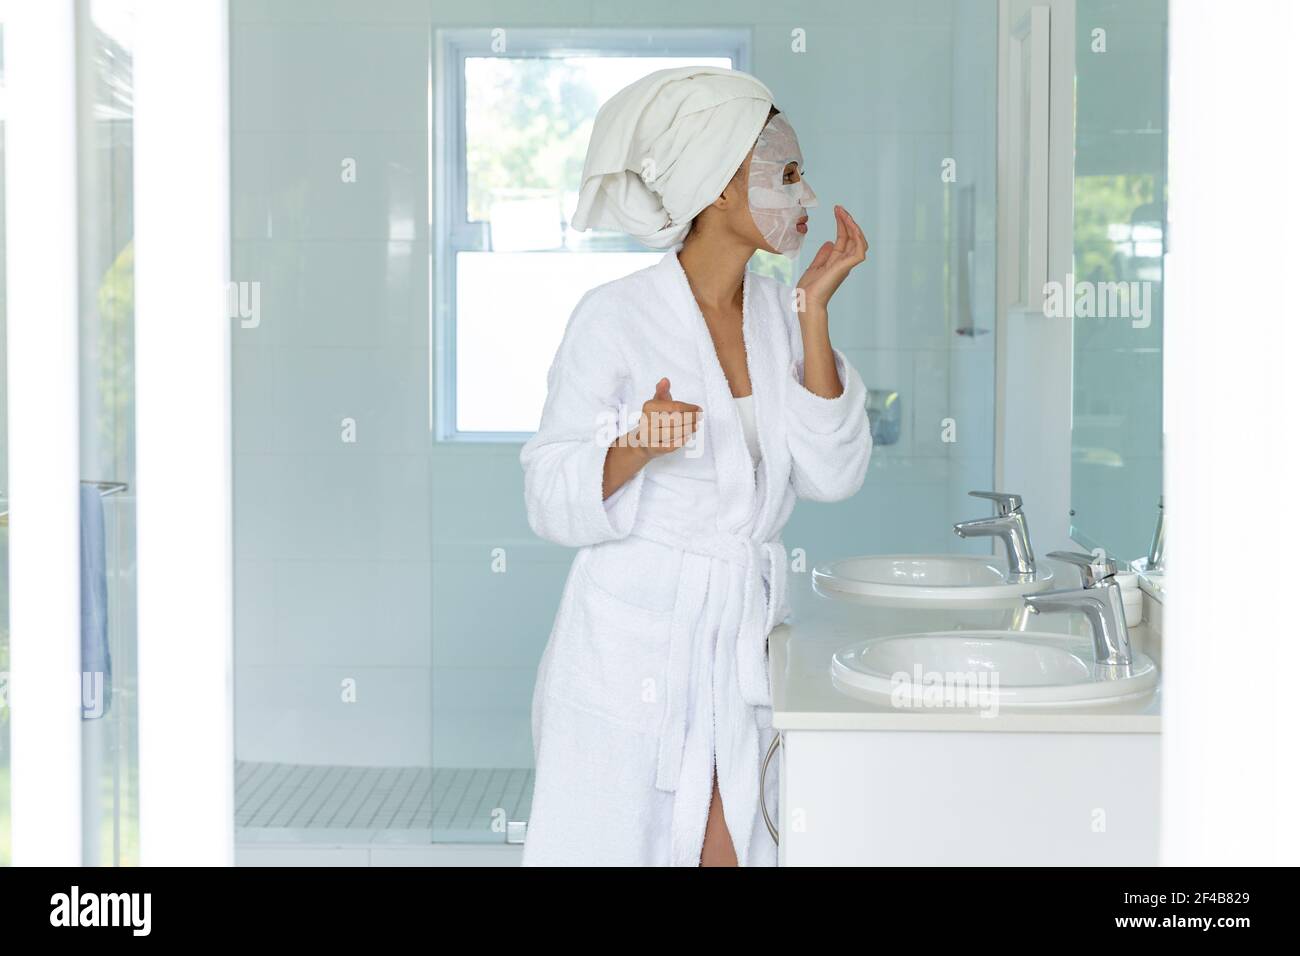 Mixed race woman wearing bathrobe and cleansing face mask in bathroom Stock Photo